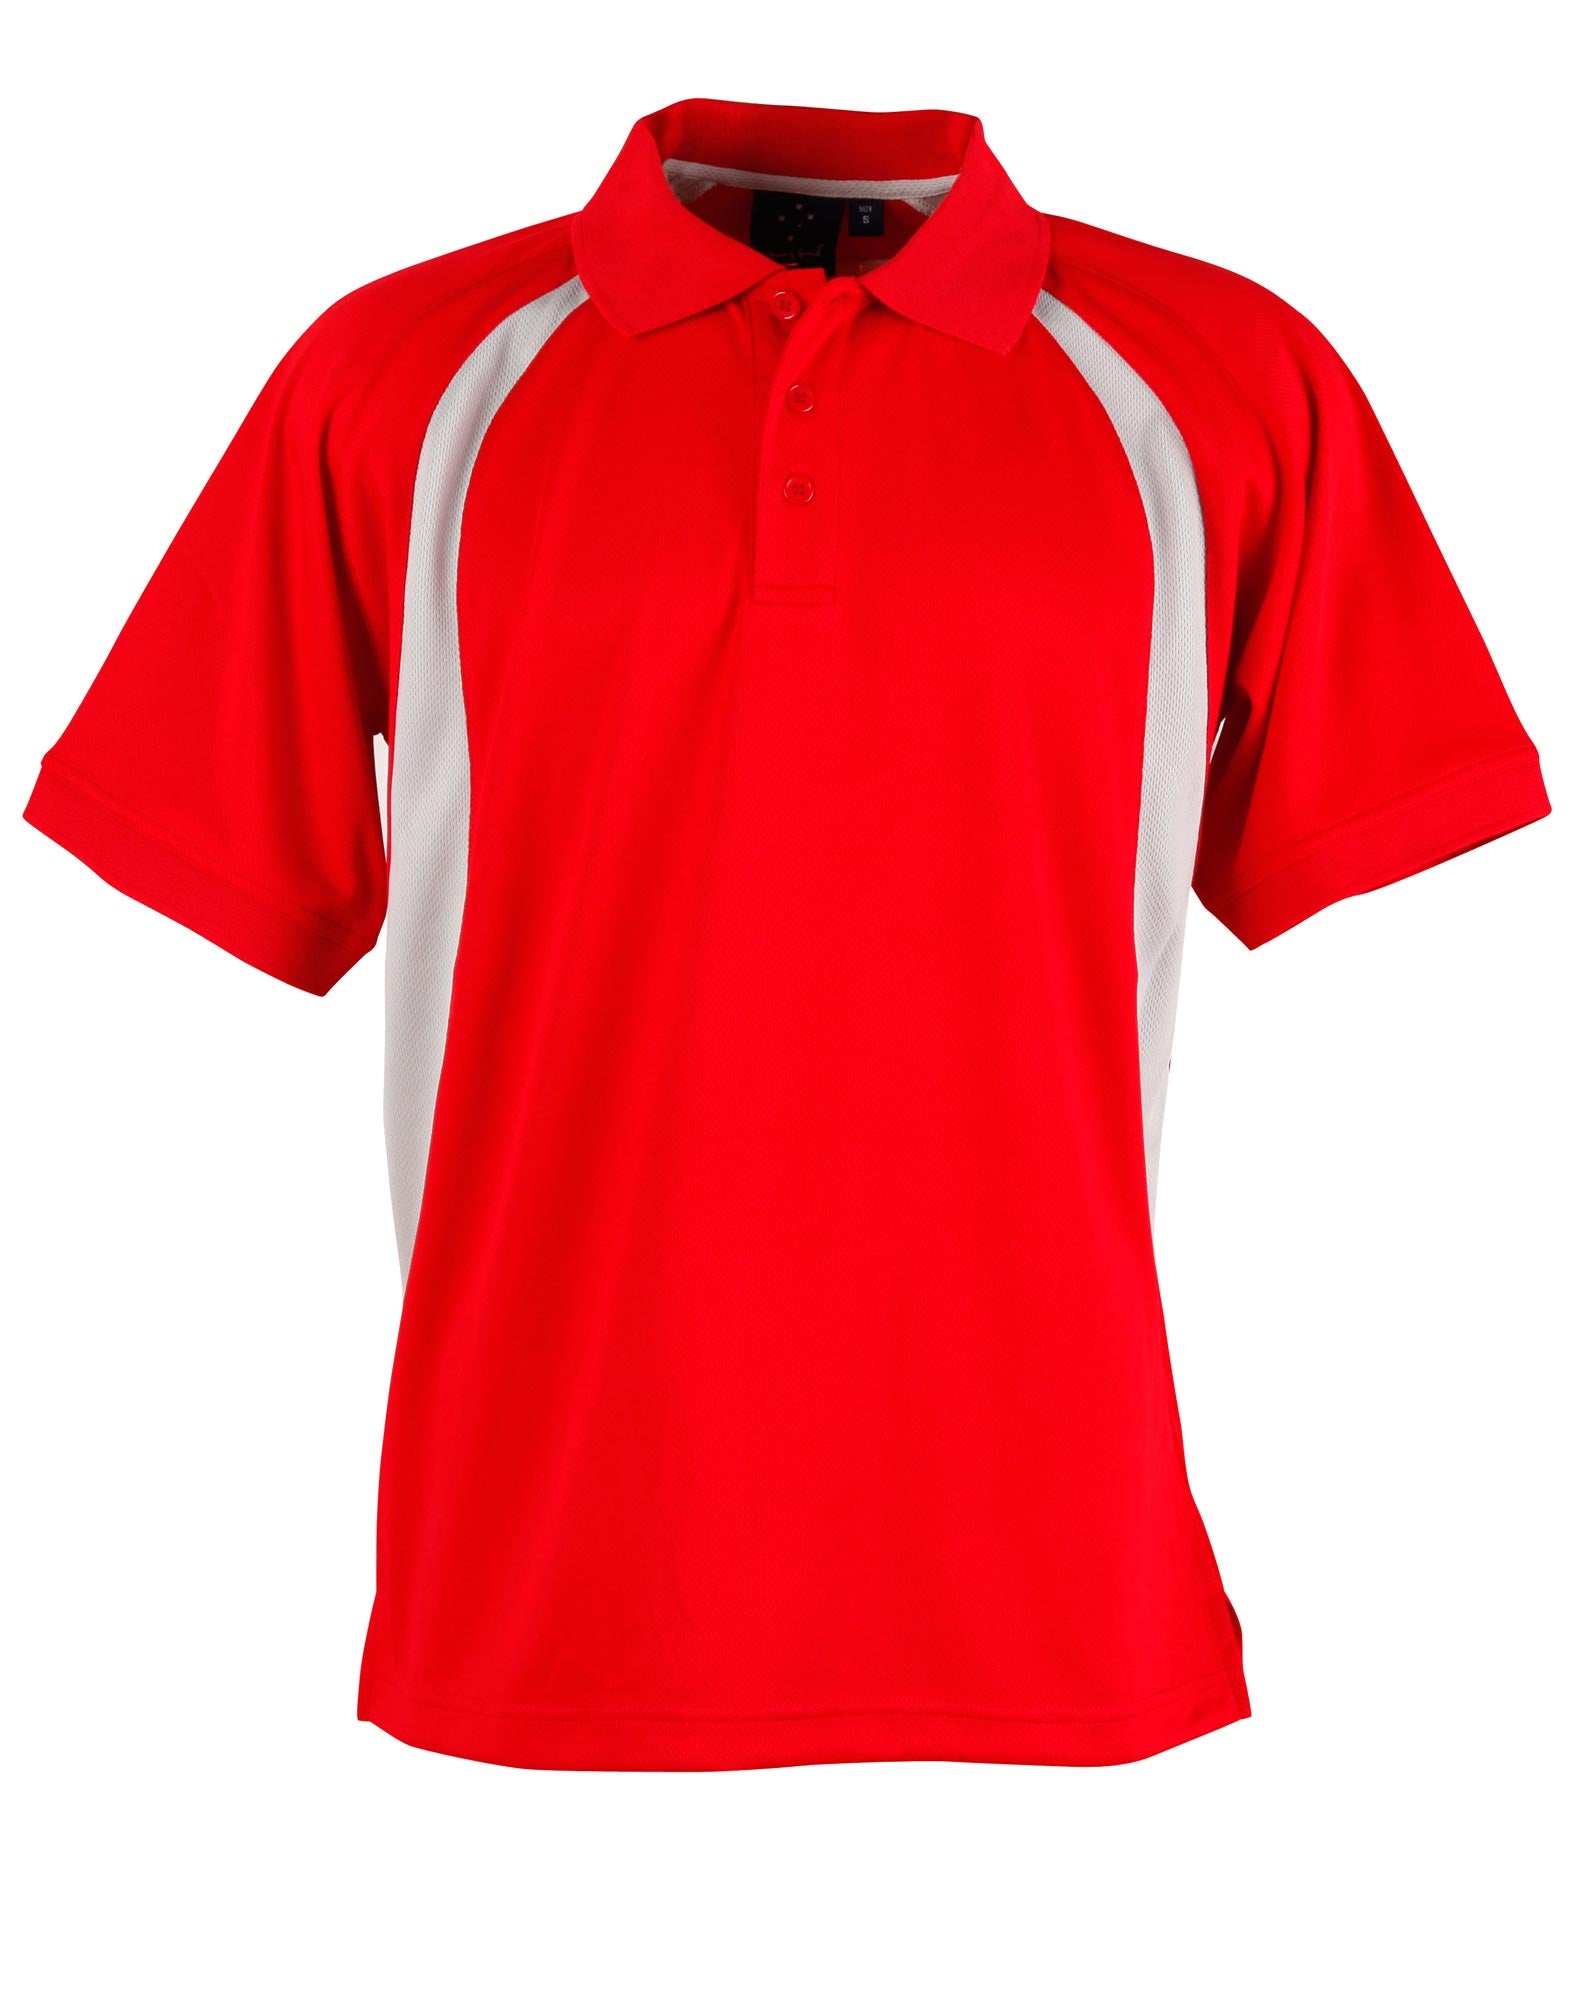 [PS51] Mens CoolDry Soft Mesh Polo